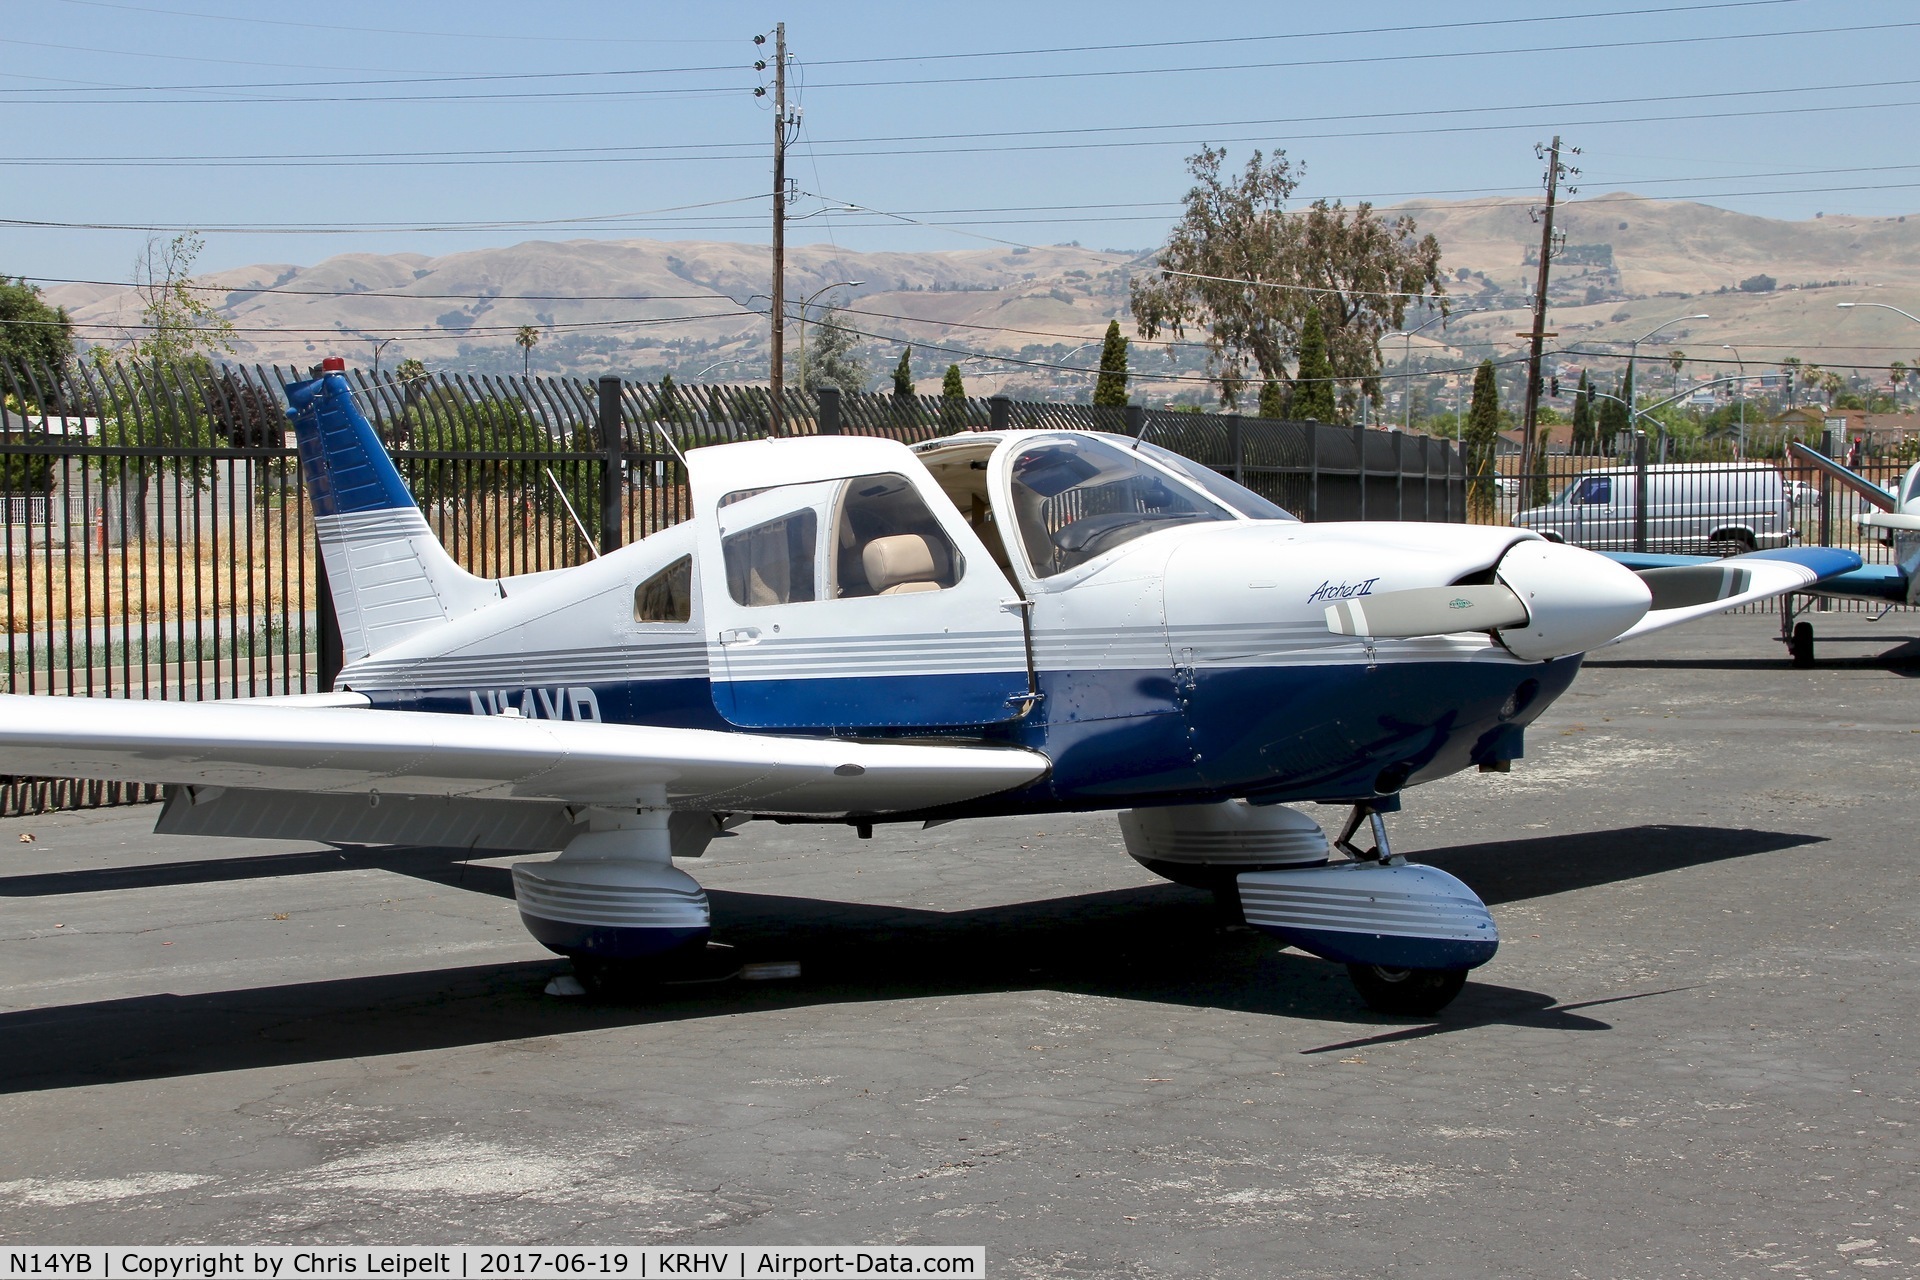 N14YB, 1979 Piper PA-28-181 C/N 28-7990461, Locally-based 1979 Piper PA-28-181 parked on the ramp at Reid Hillview Airport, San Jose, CA. For sale with LAS at time of photo.